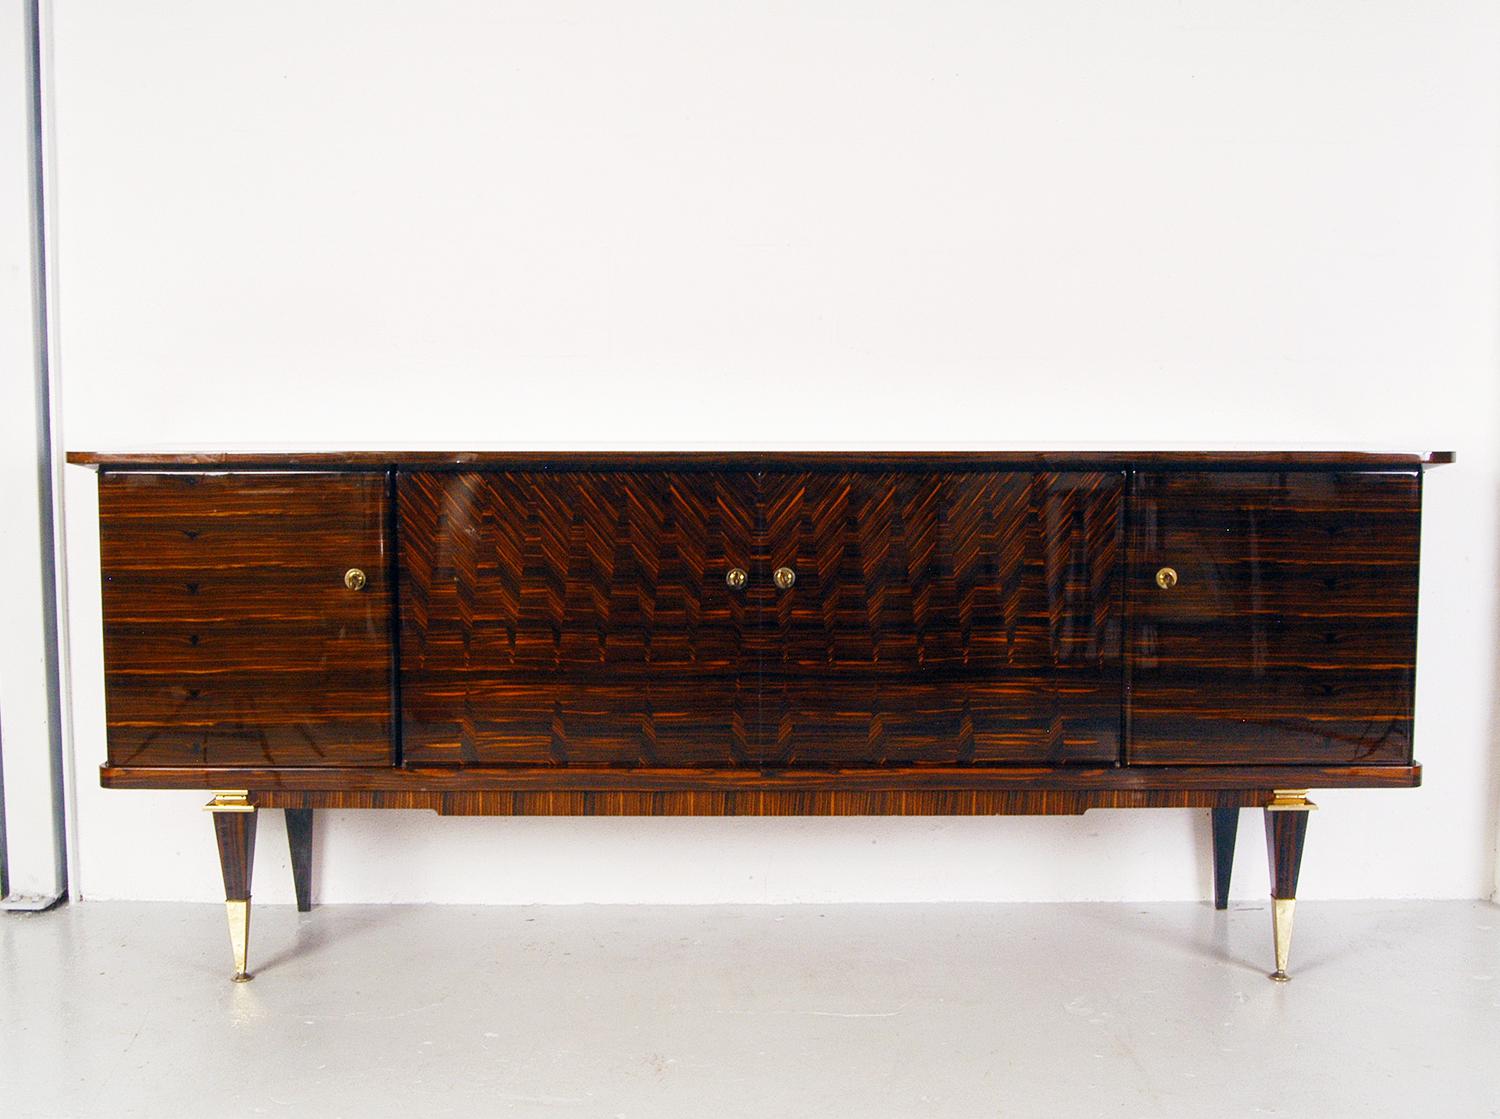 A wonderfully luxurious piece of Art Deco furniture from the days of high glamour. Beautifully designed and executed making full use of the striking grain pattern of Macassar Ebony. The interior of the piece is finished in lacquered maple. Three of